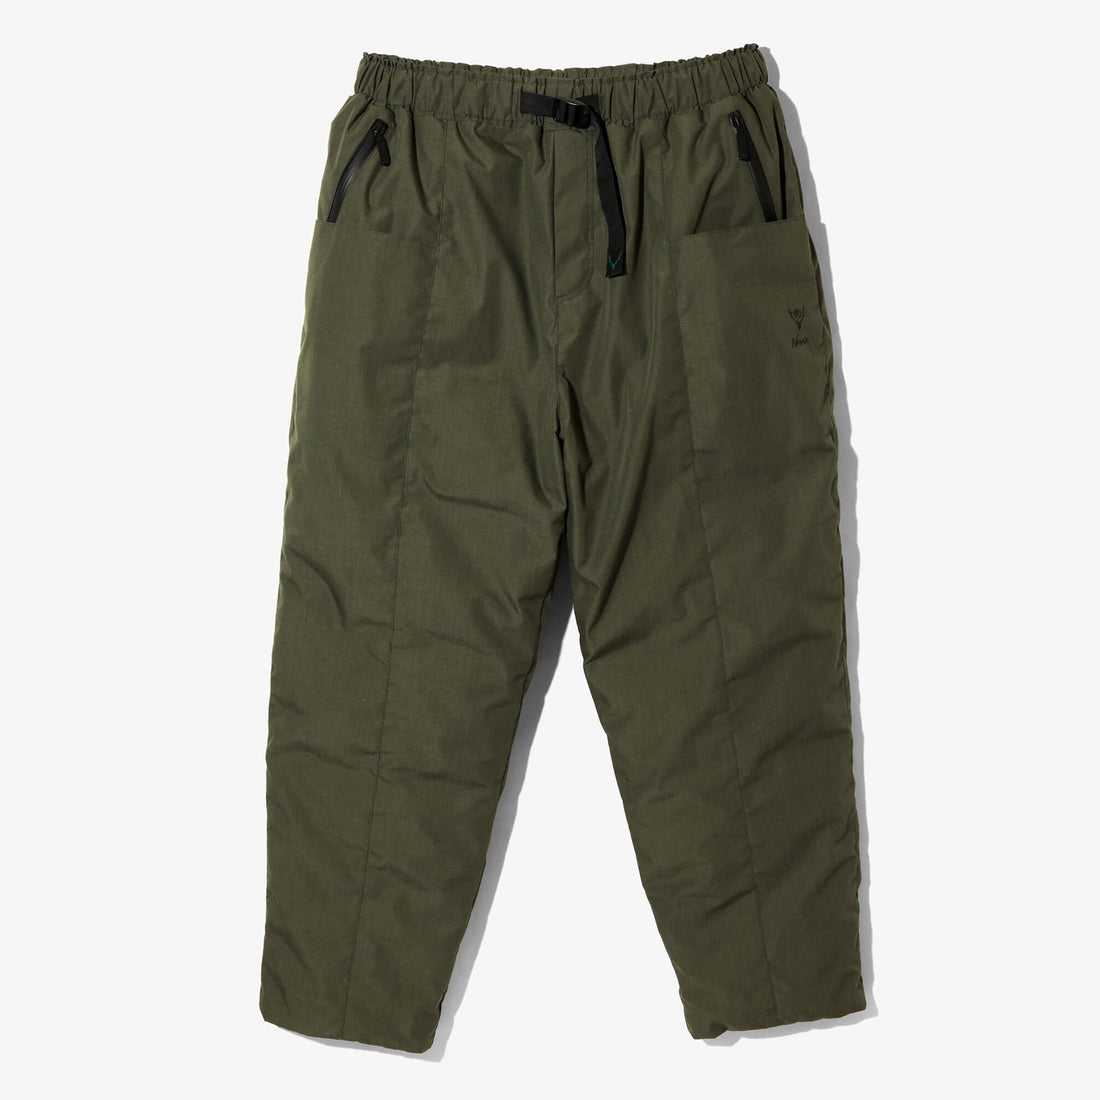 SOUTH2 WEST8×NANGA BELTED C.S. DOWN PANTS - FLAME RESISTANT / ベルテッド C.S. ダウンパンツフレームレジスタント